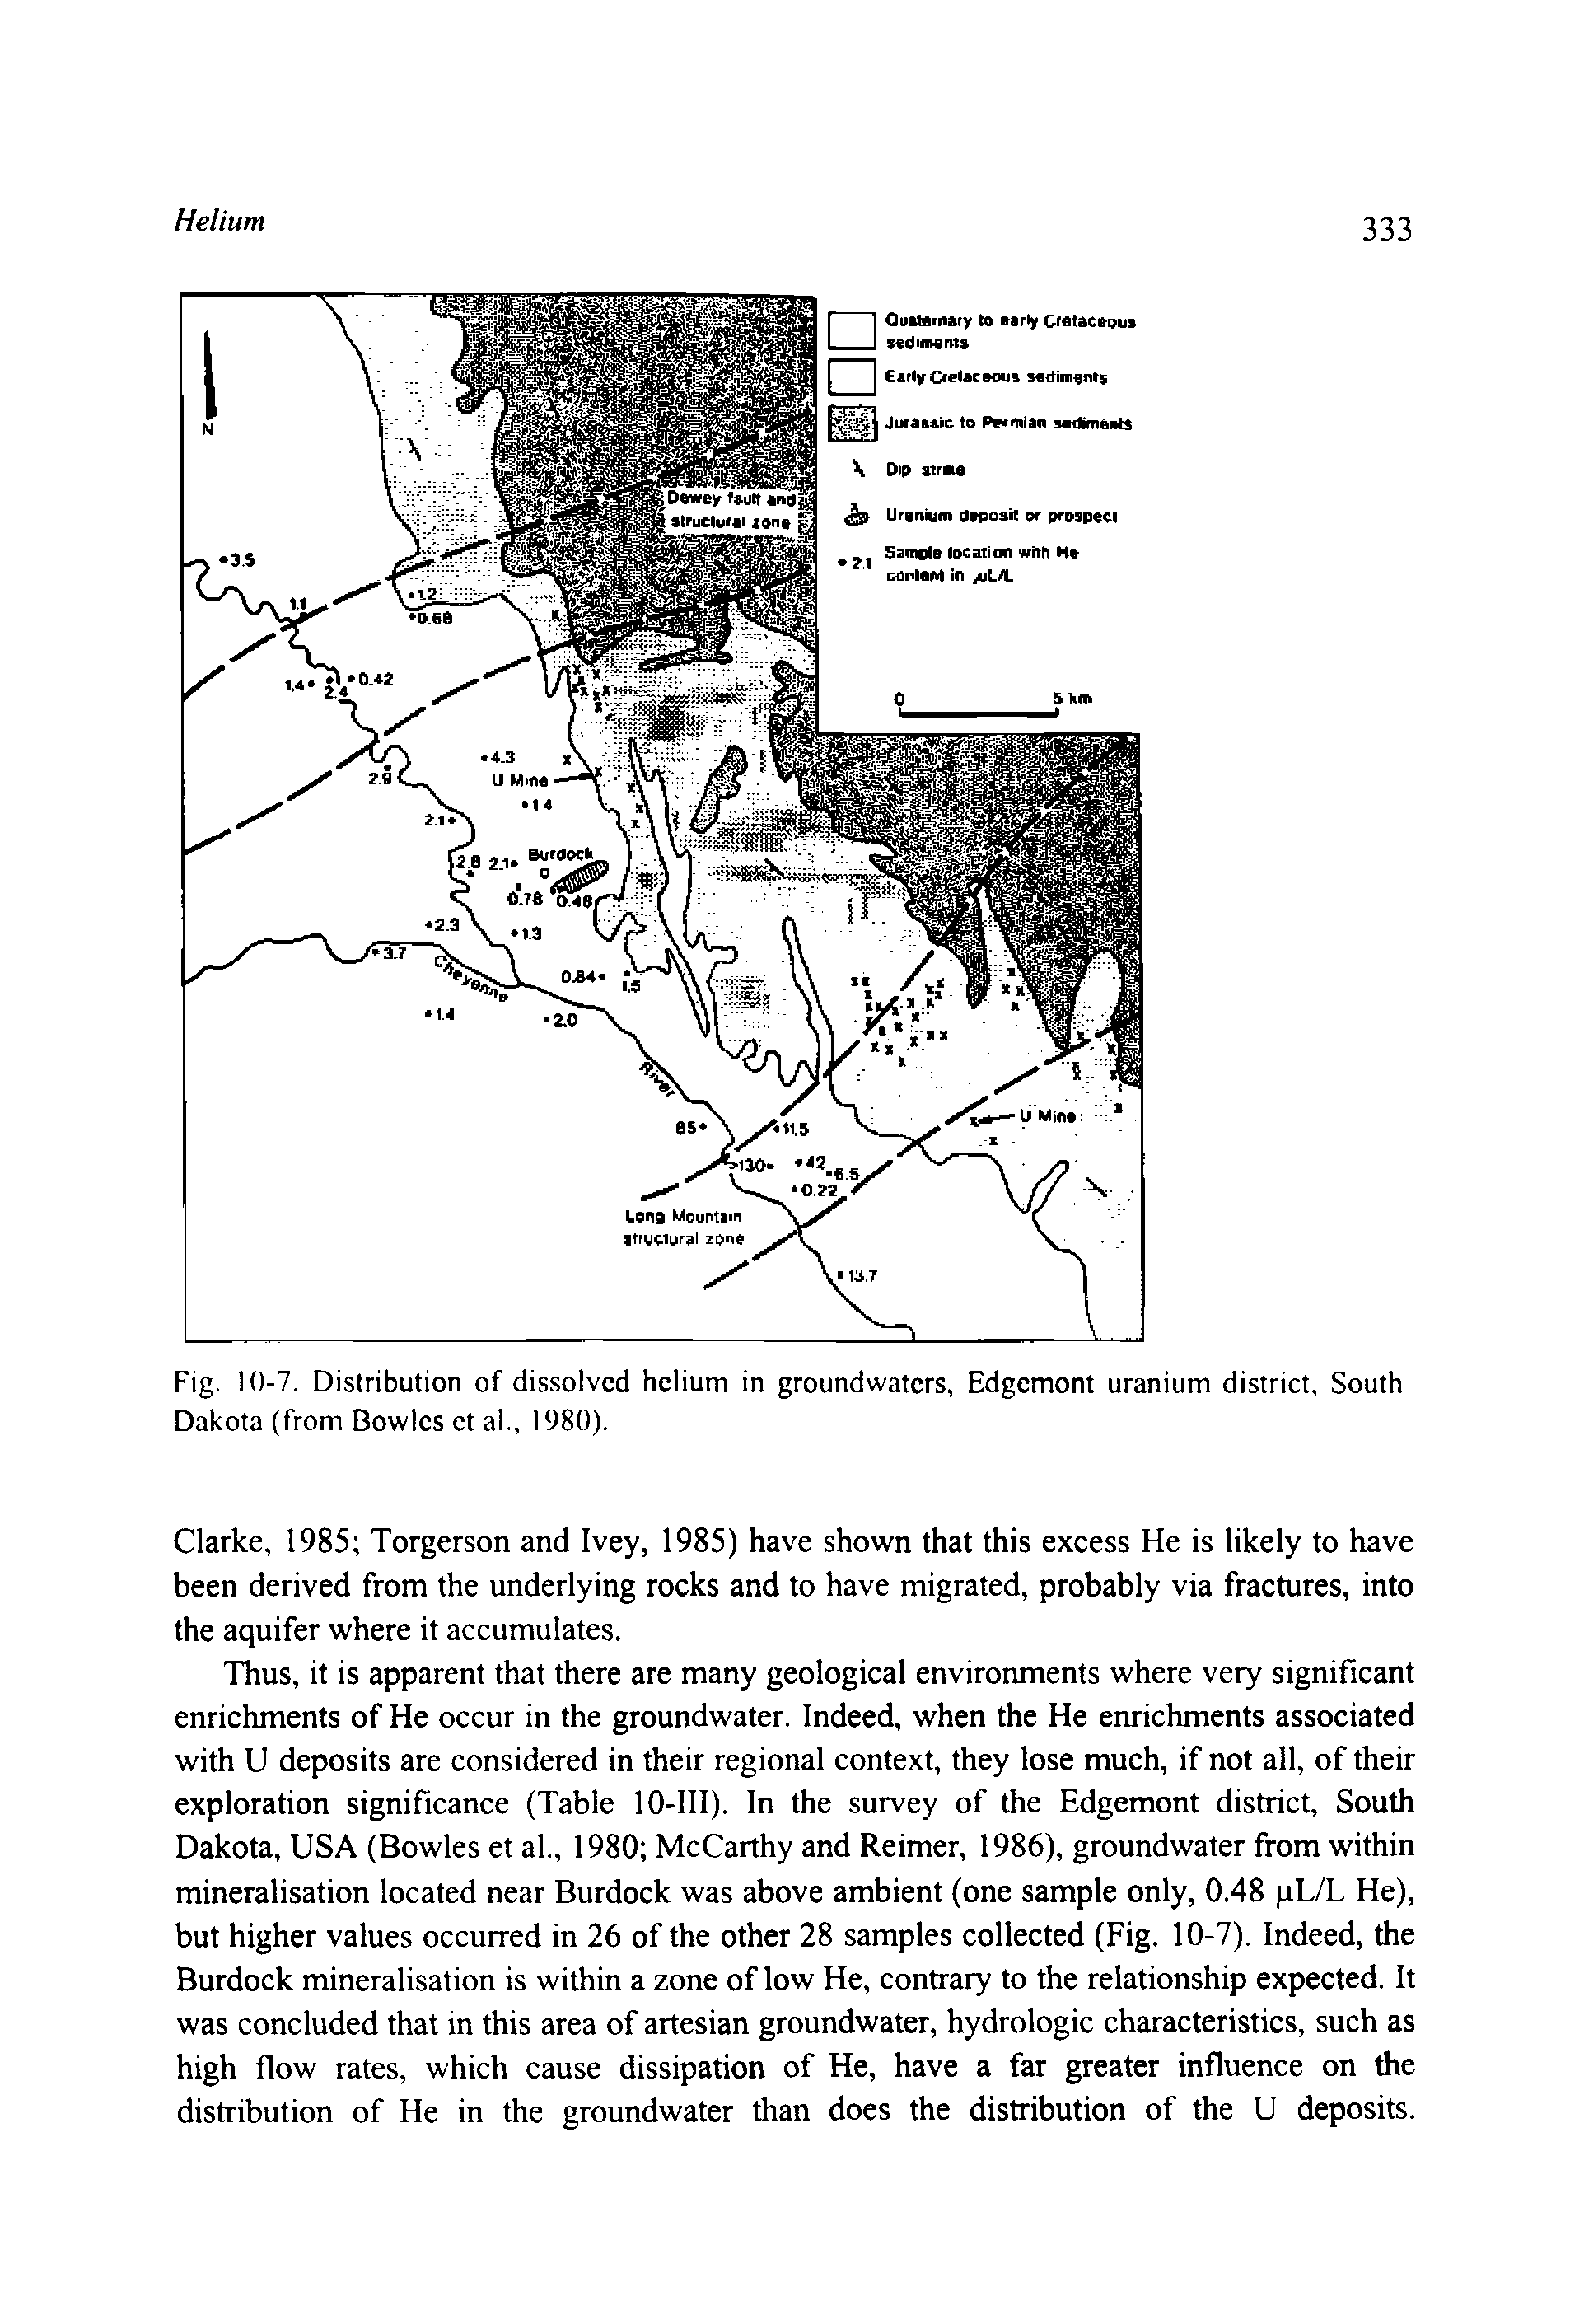 Fig. 10-7. Distribution of dissolved helium in groundwaters, Edgemont uranium district, South Dakota (from Bowles ct al., 1980).